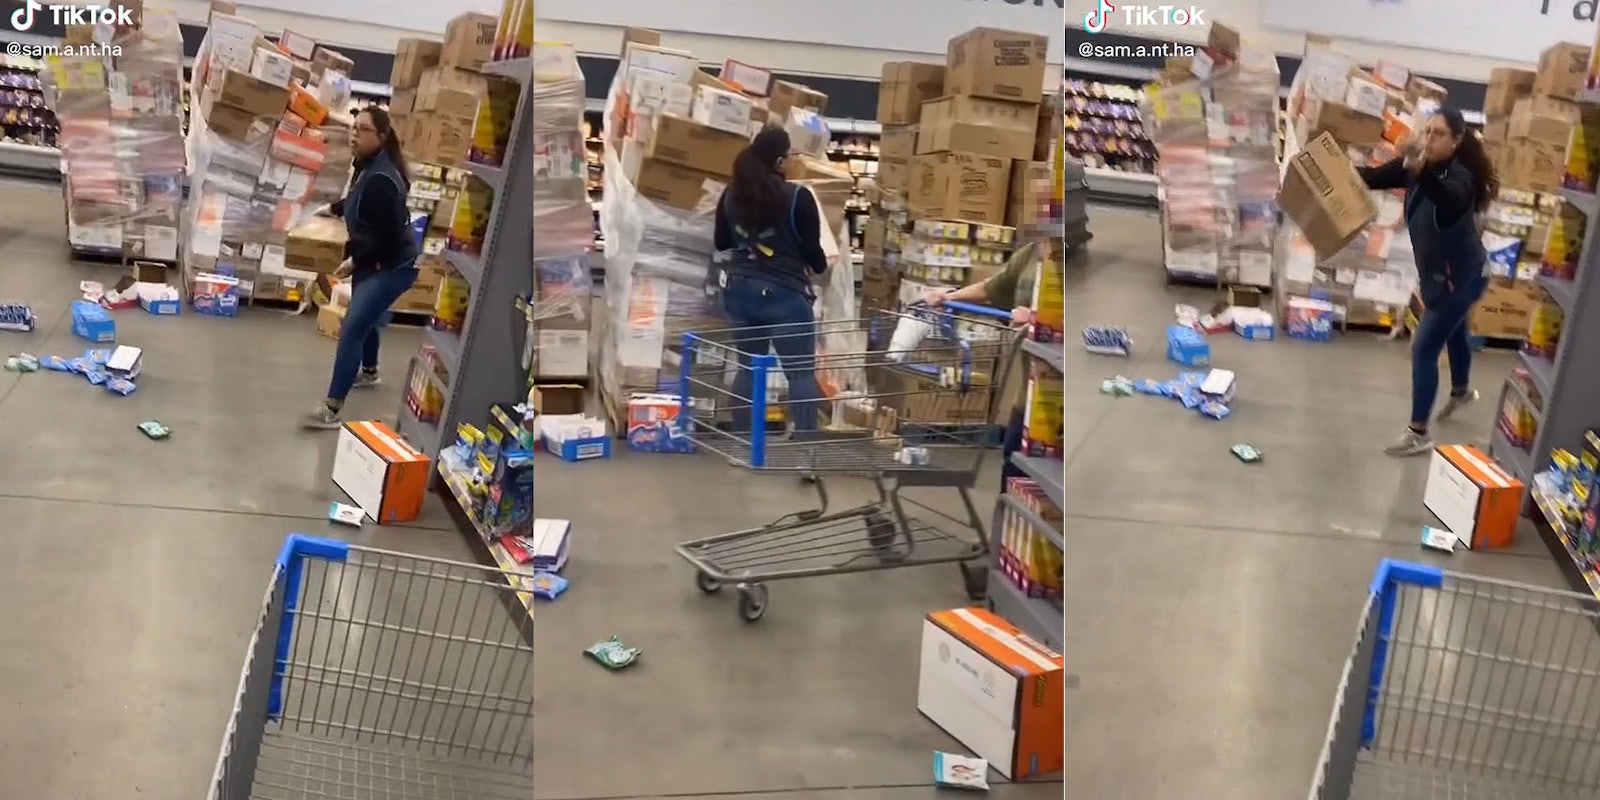 Walmart worker holding box aiming to throw it down aisle (l) walmart worker grabbing box from large stack (c) Walmart worker in motion throwing box (r)